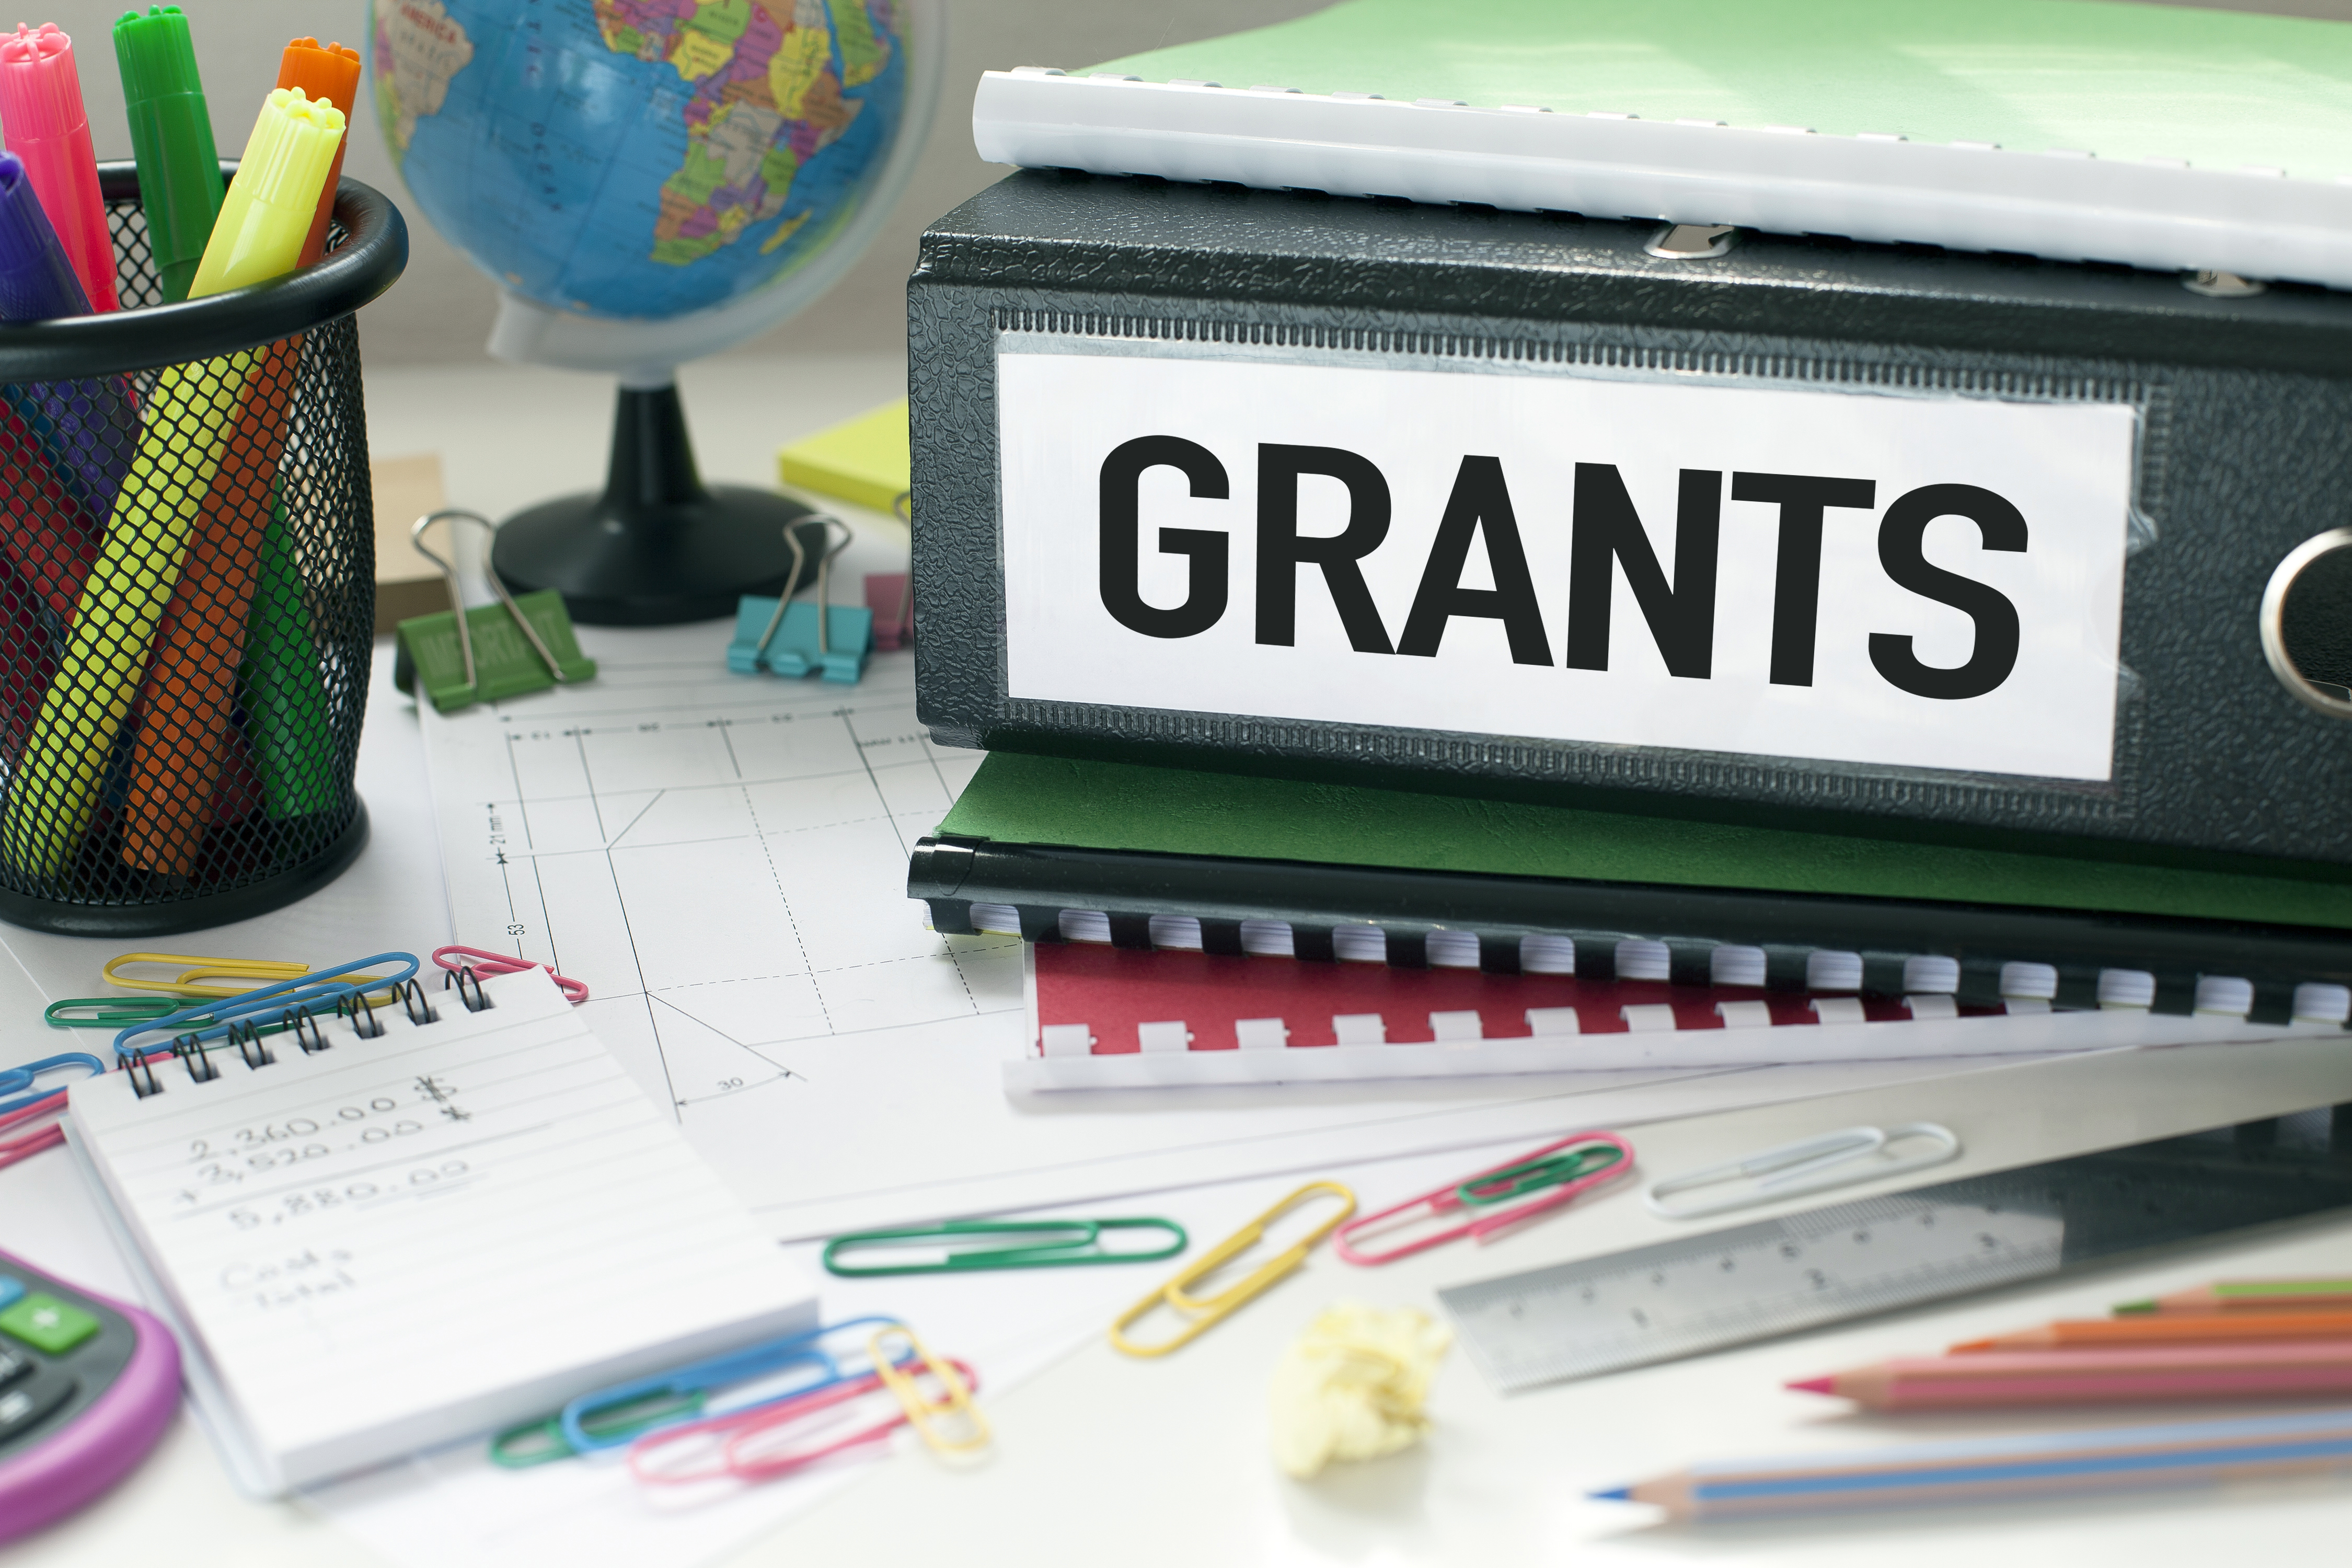 Desk with large binder with "Grants" labelled on the side